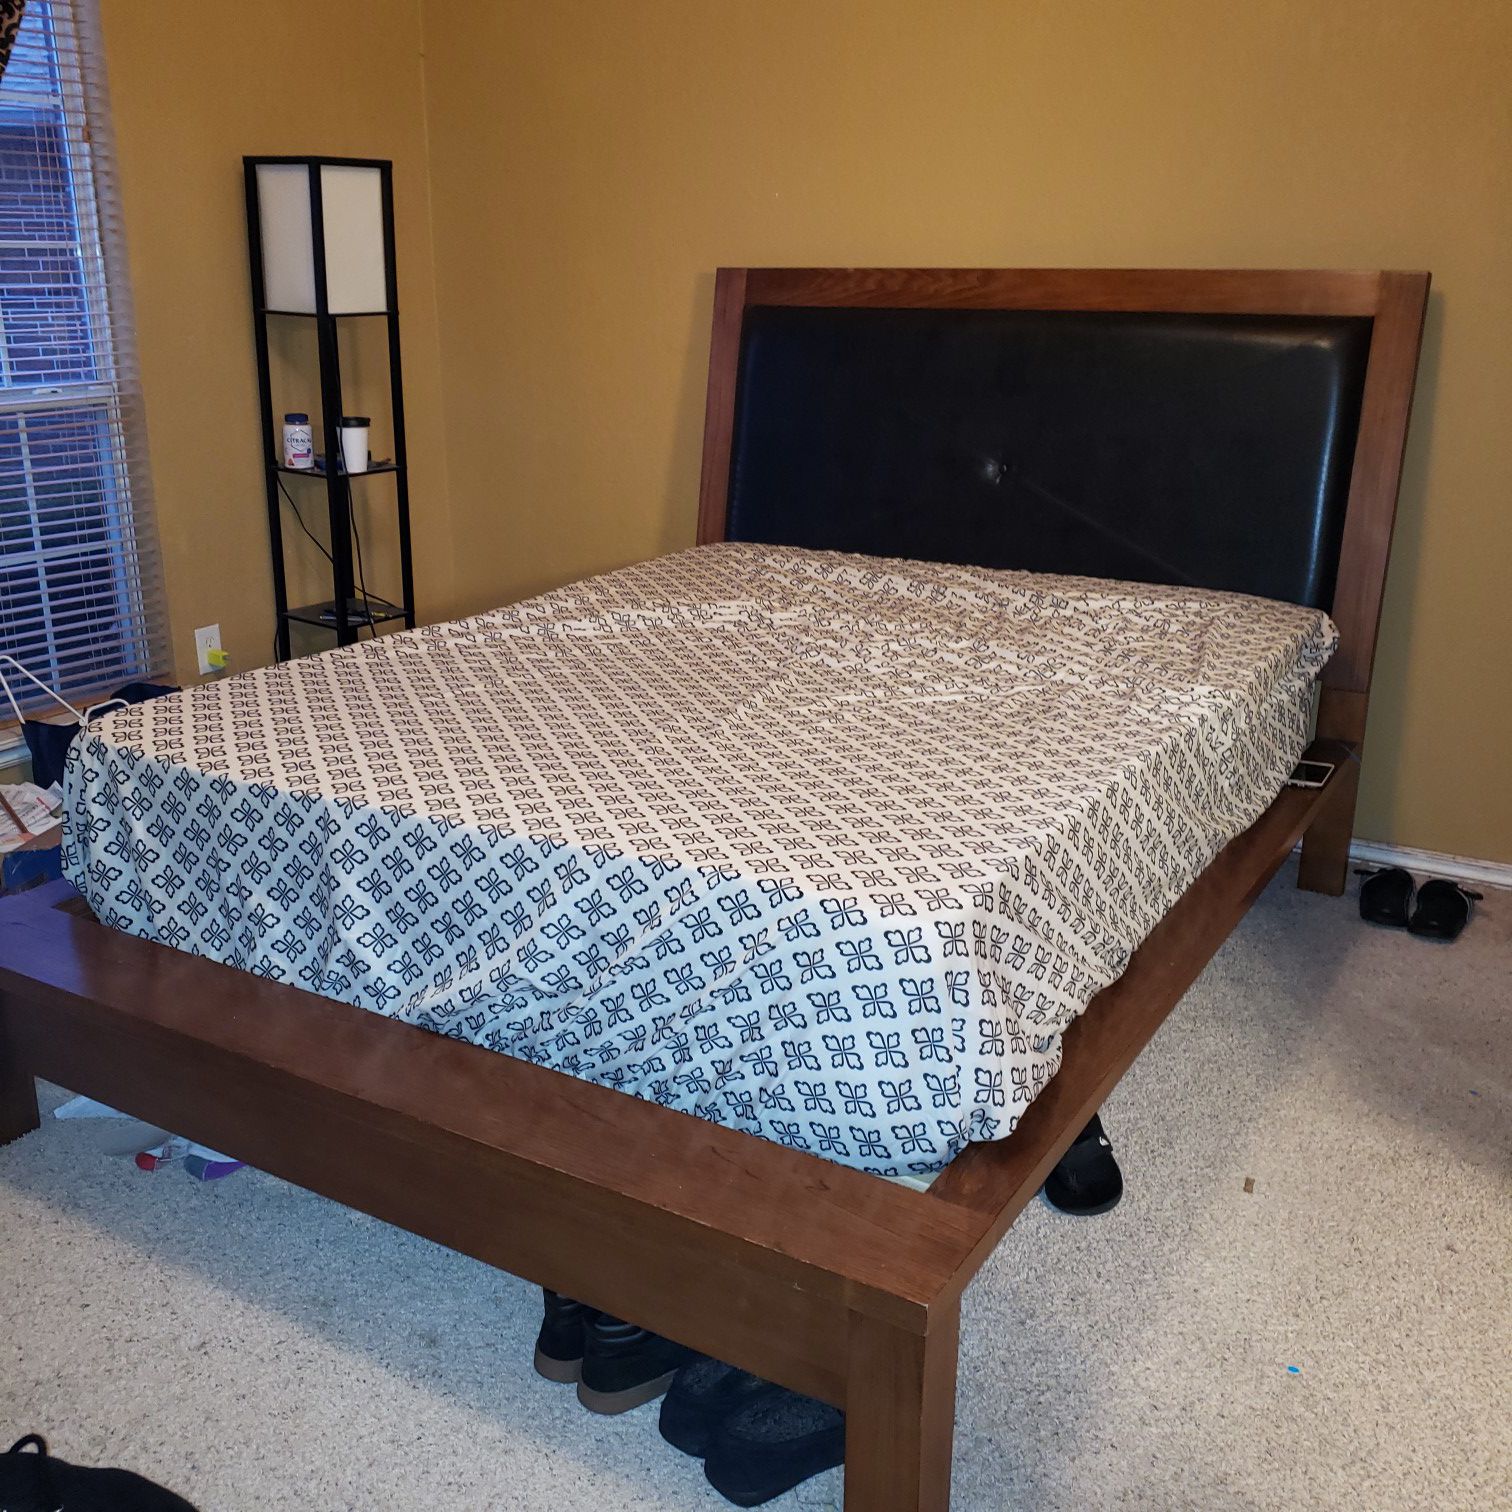 Solid wood queen bed frame.